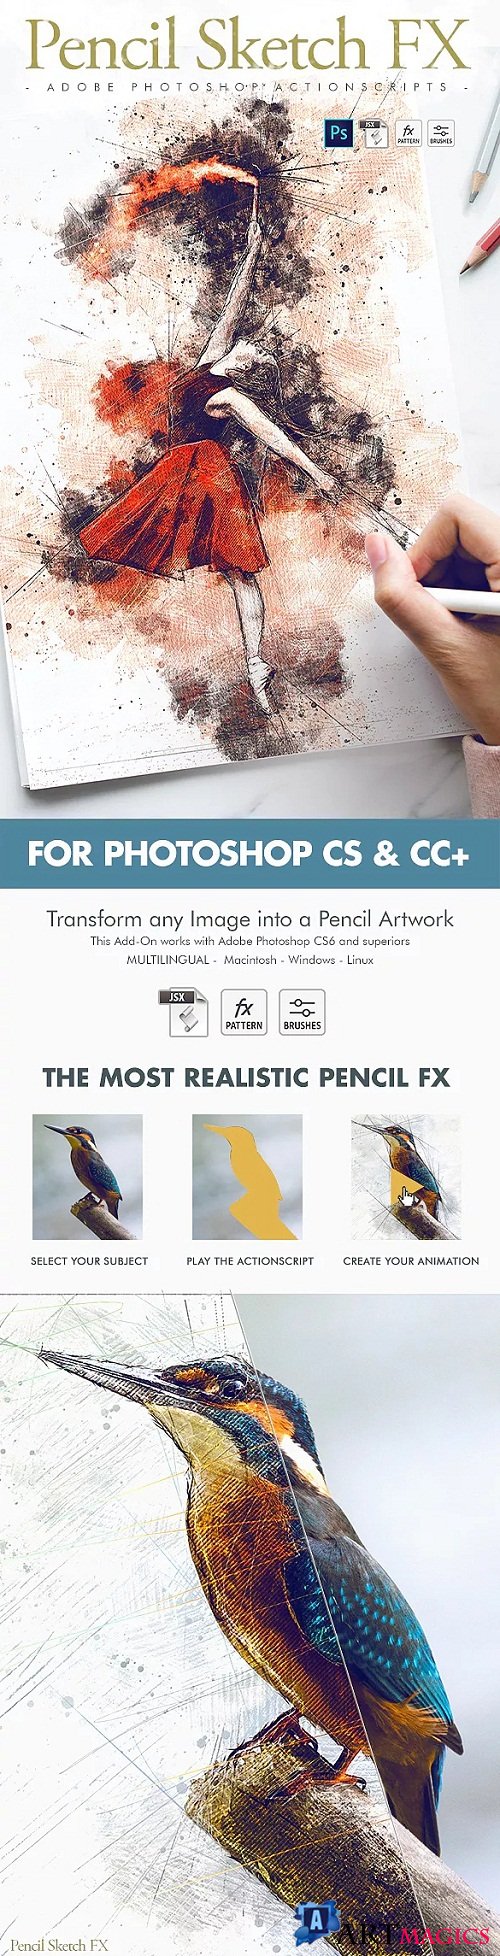 Animated Pencil Sketch FX - Photoshop Add-On 23391849